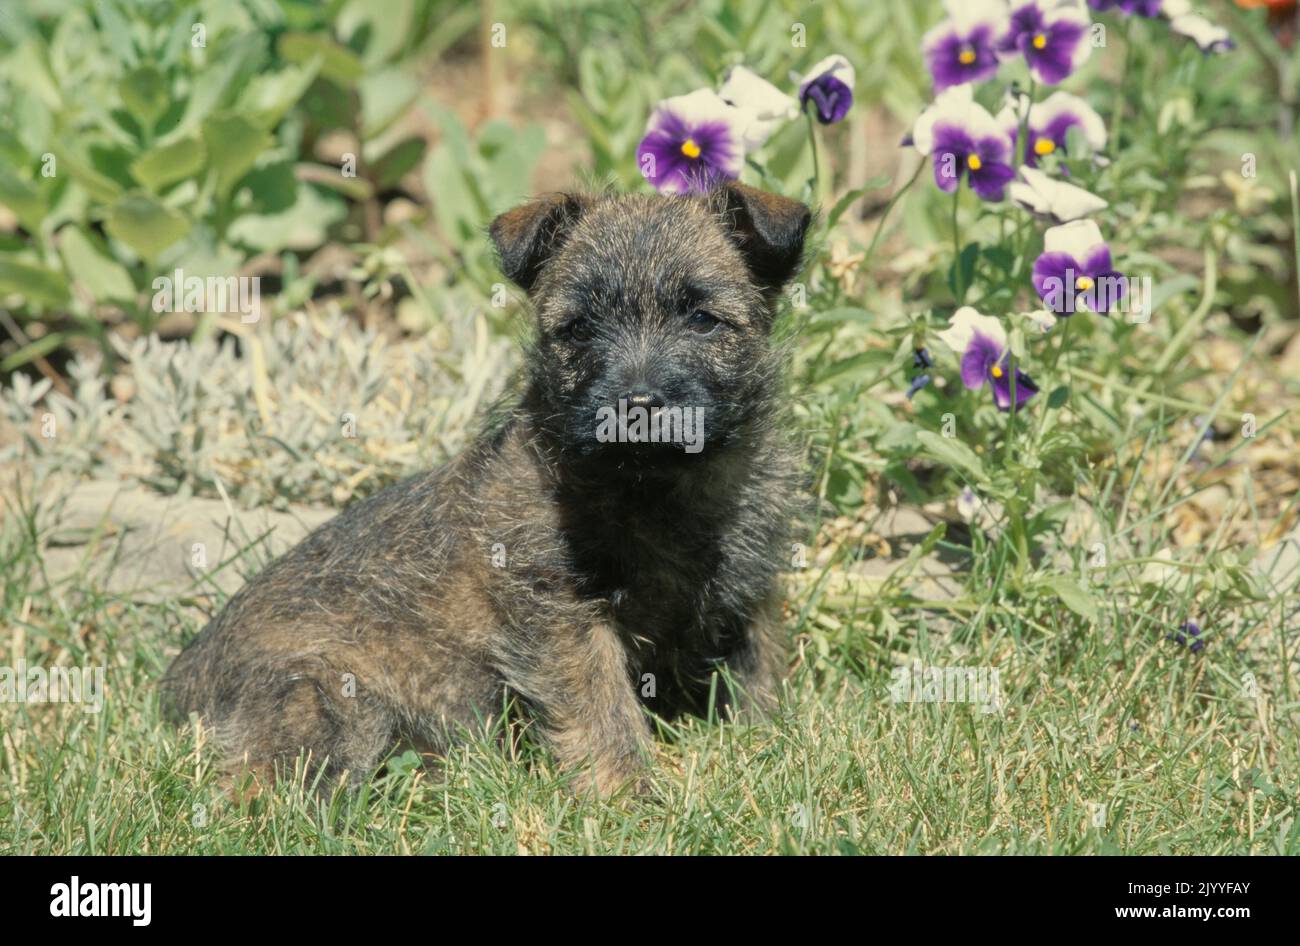 Cairn Terrier puppy in grass with flowers Stock Photo